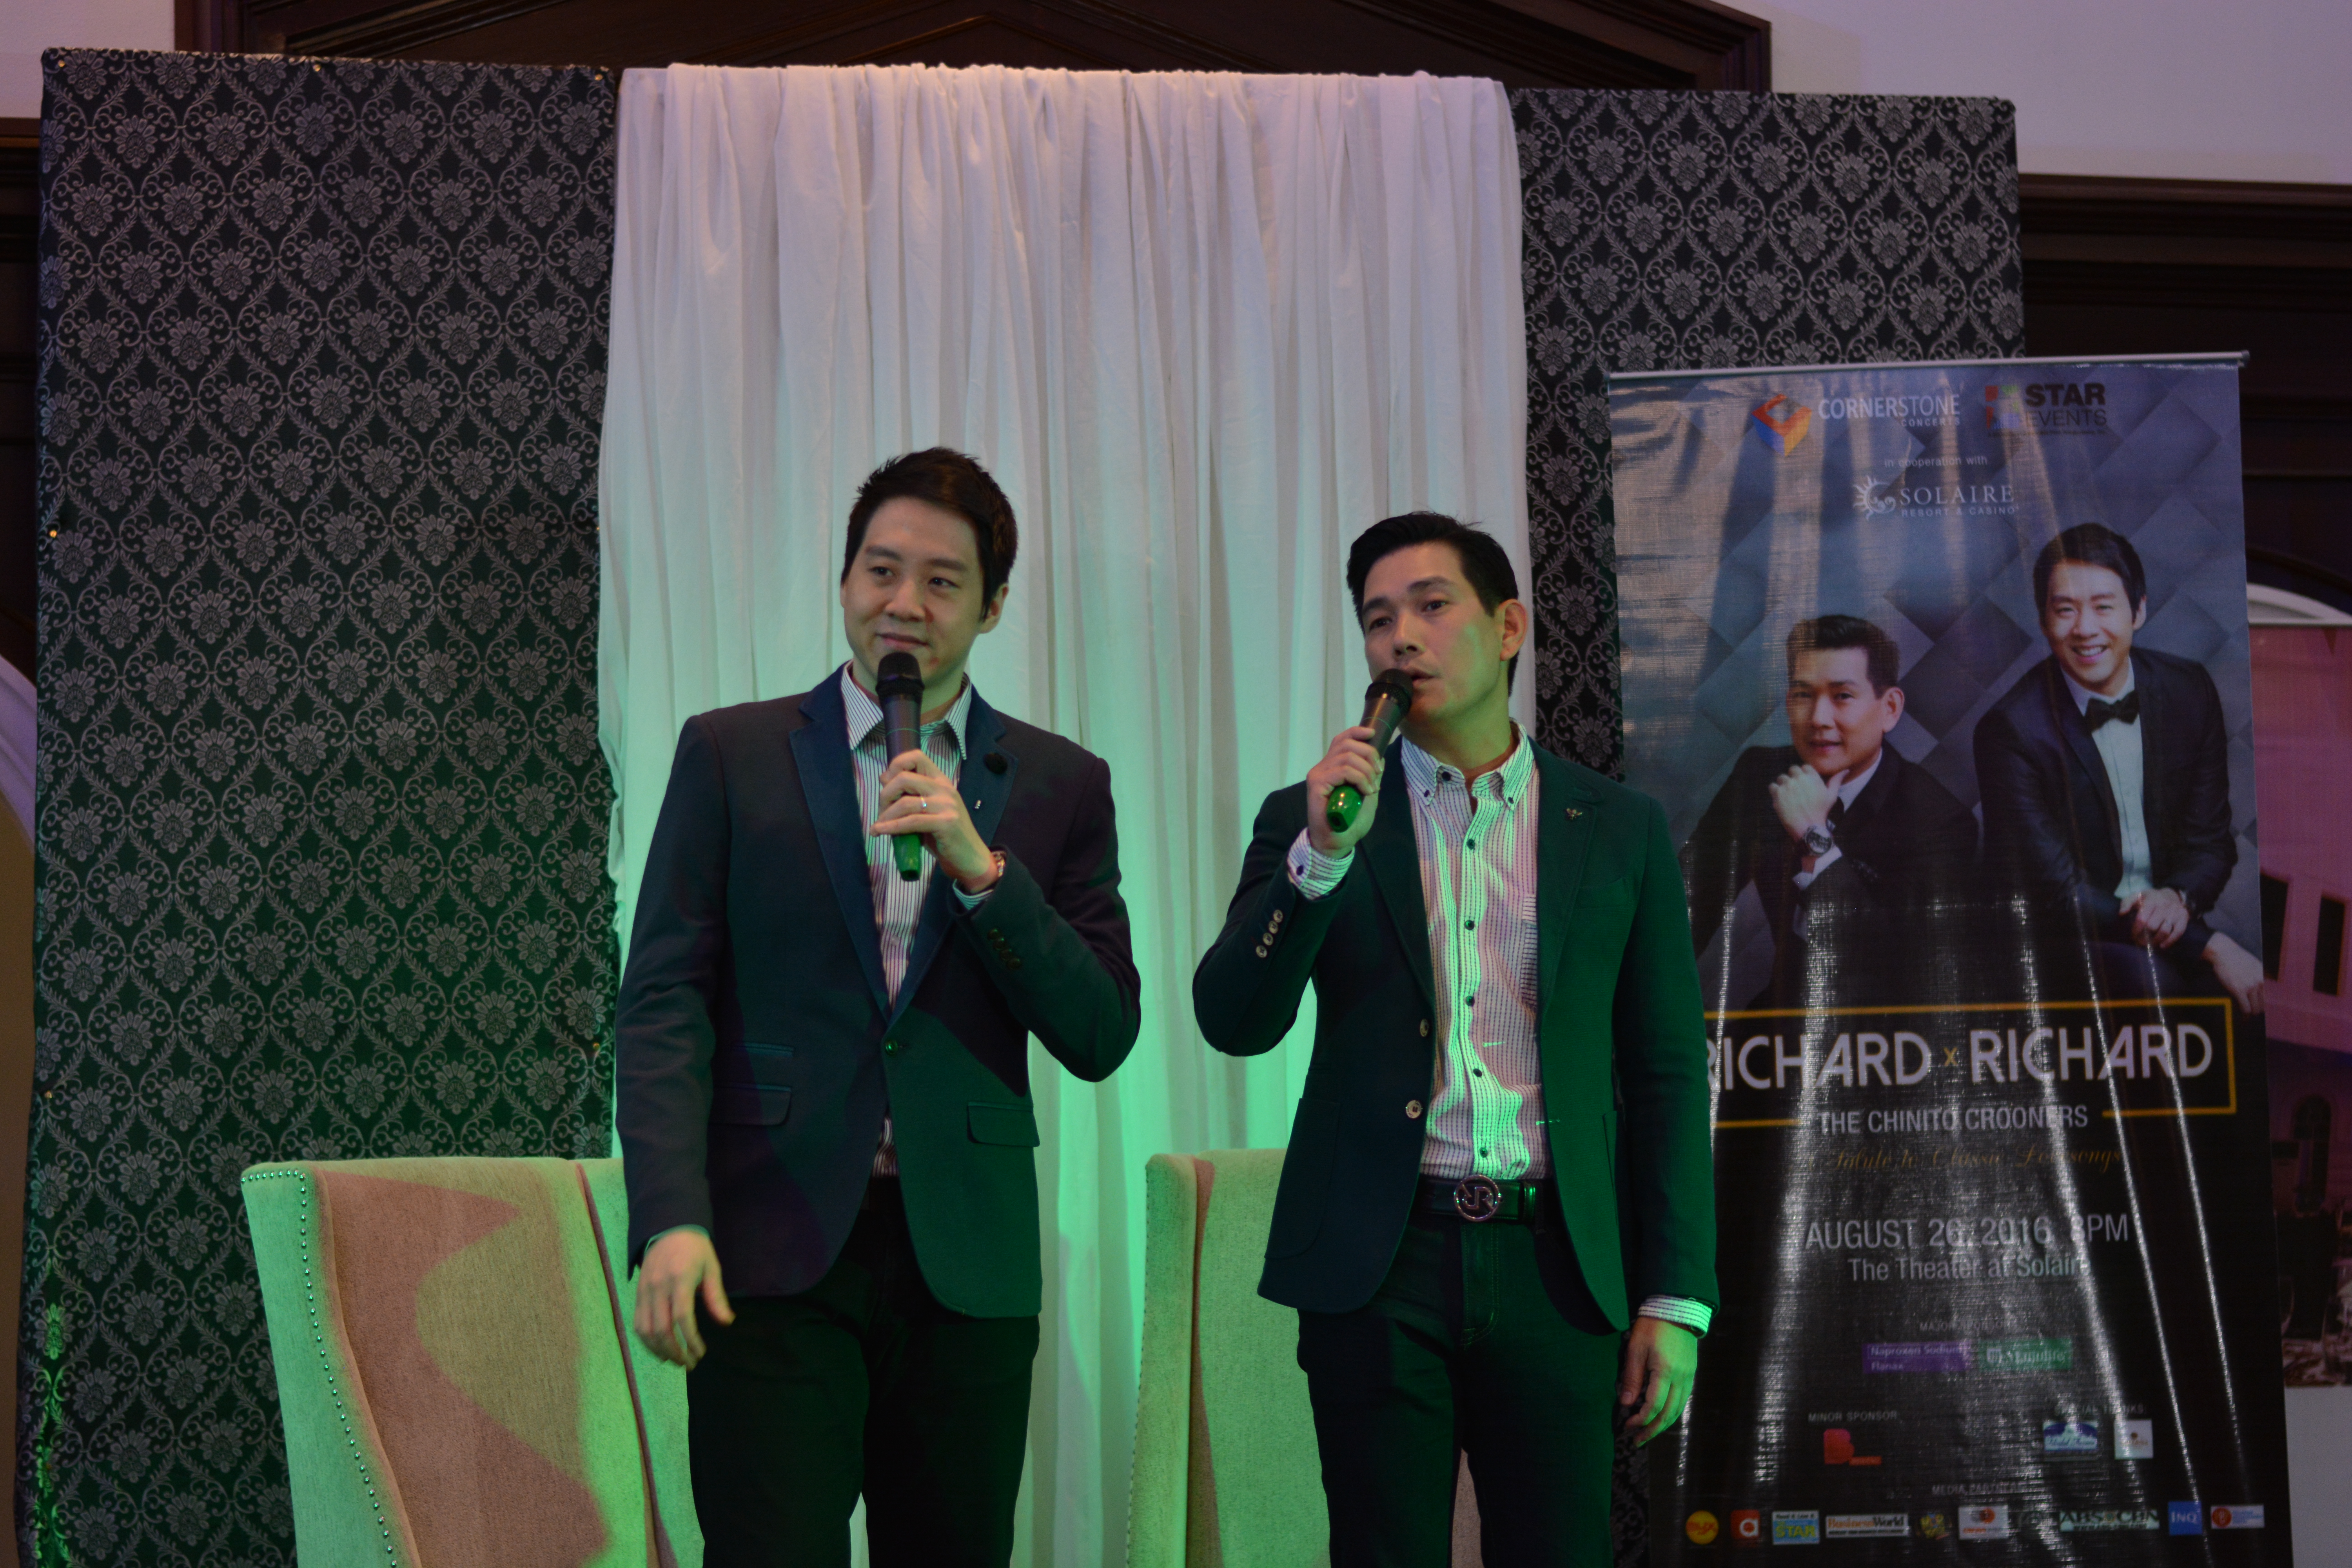 The chinito crooners perform Frankie Valli's Can't Take My Eyes Off You at the presscon last Tuesday in Felicidad Mansions.